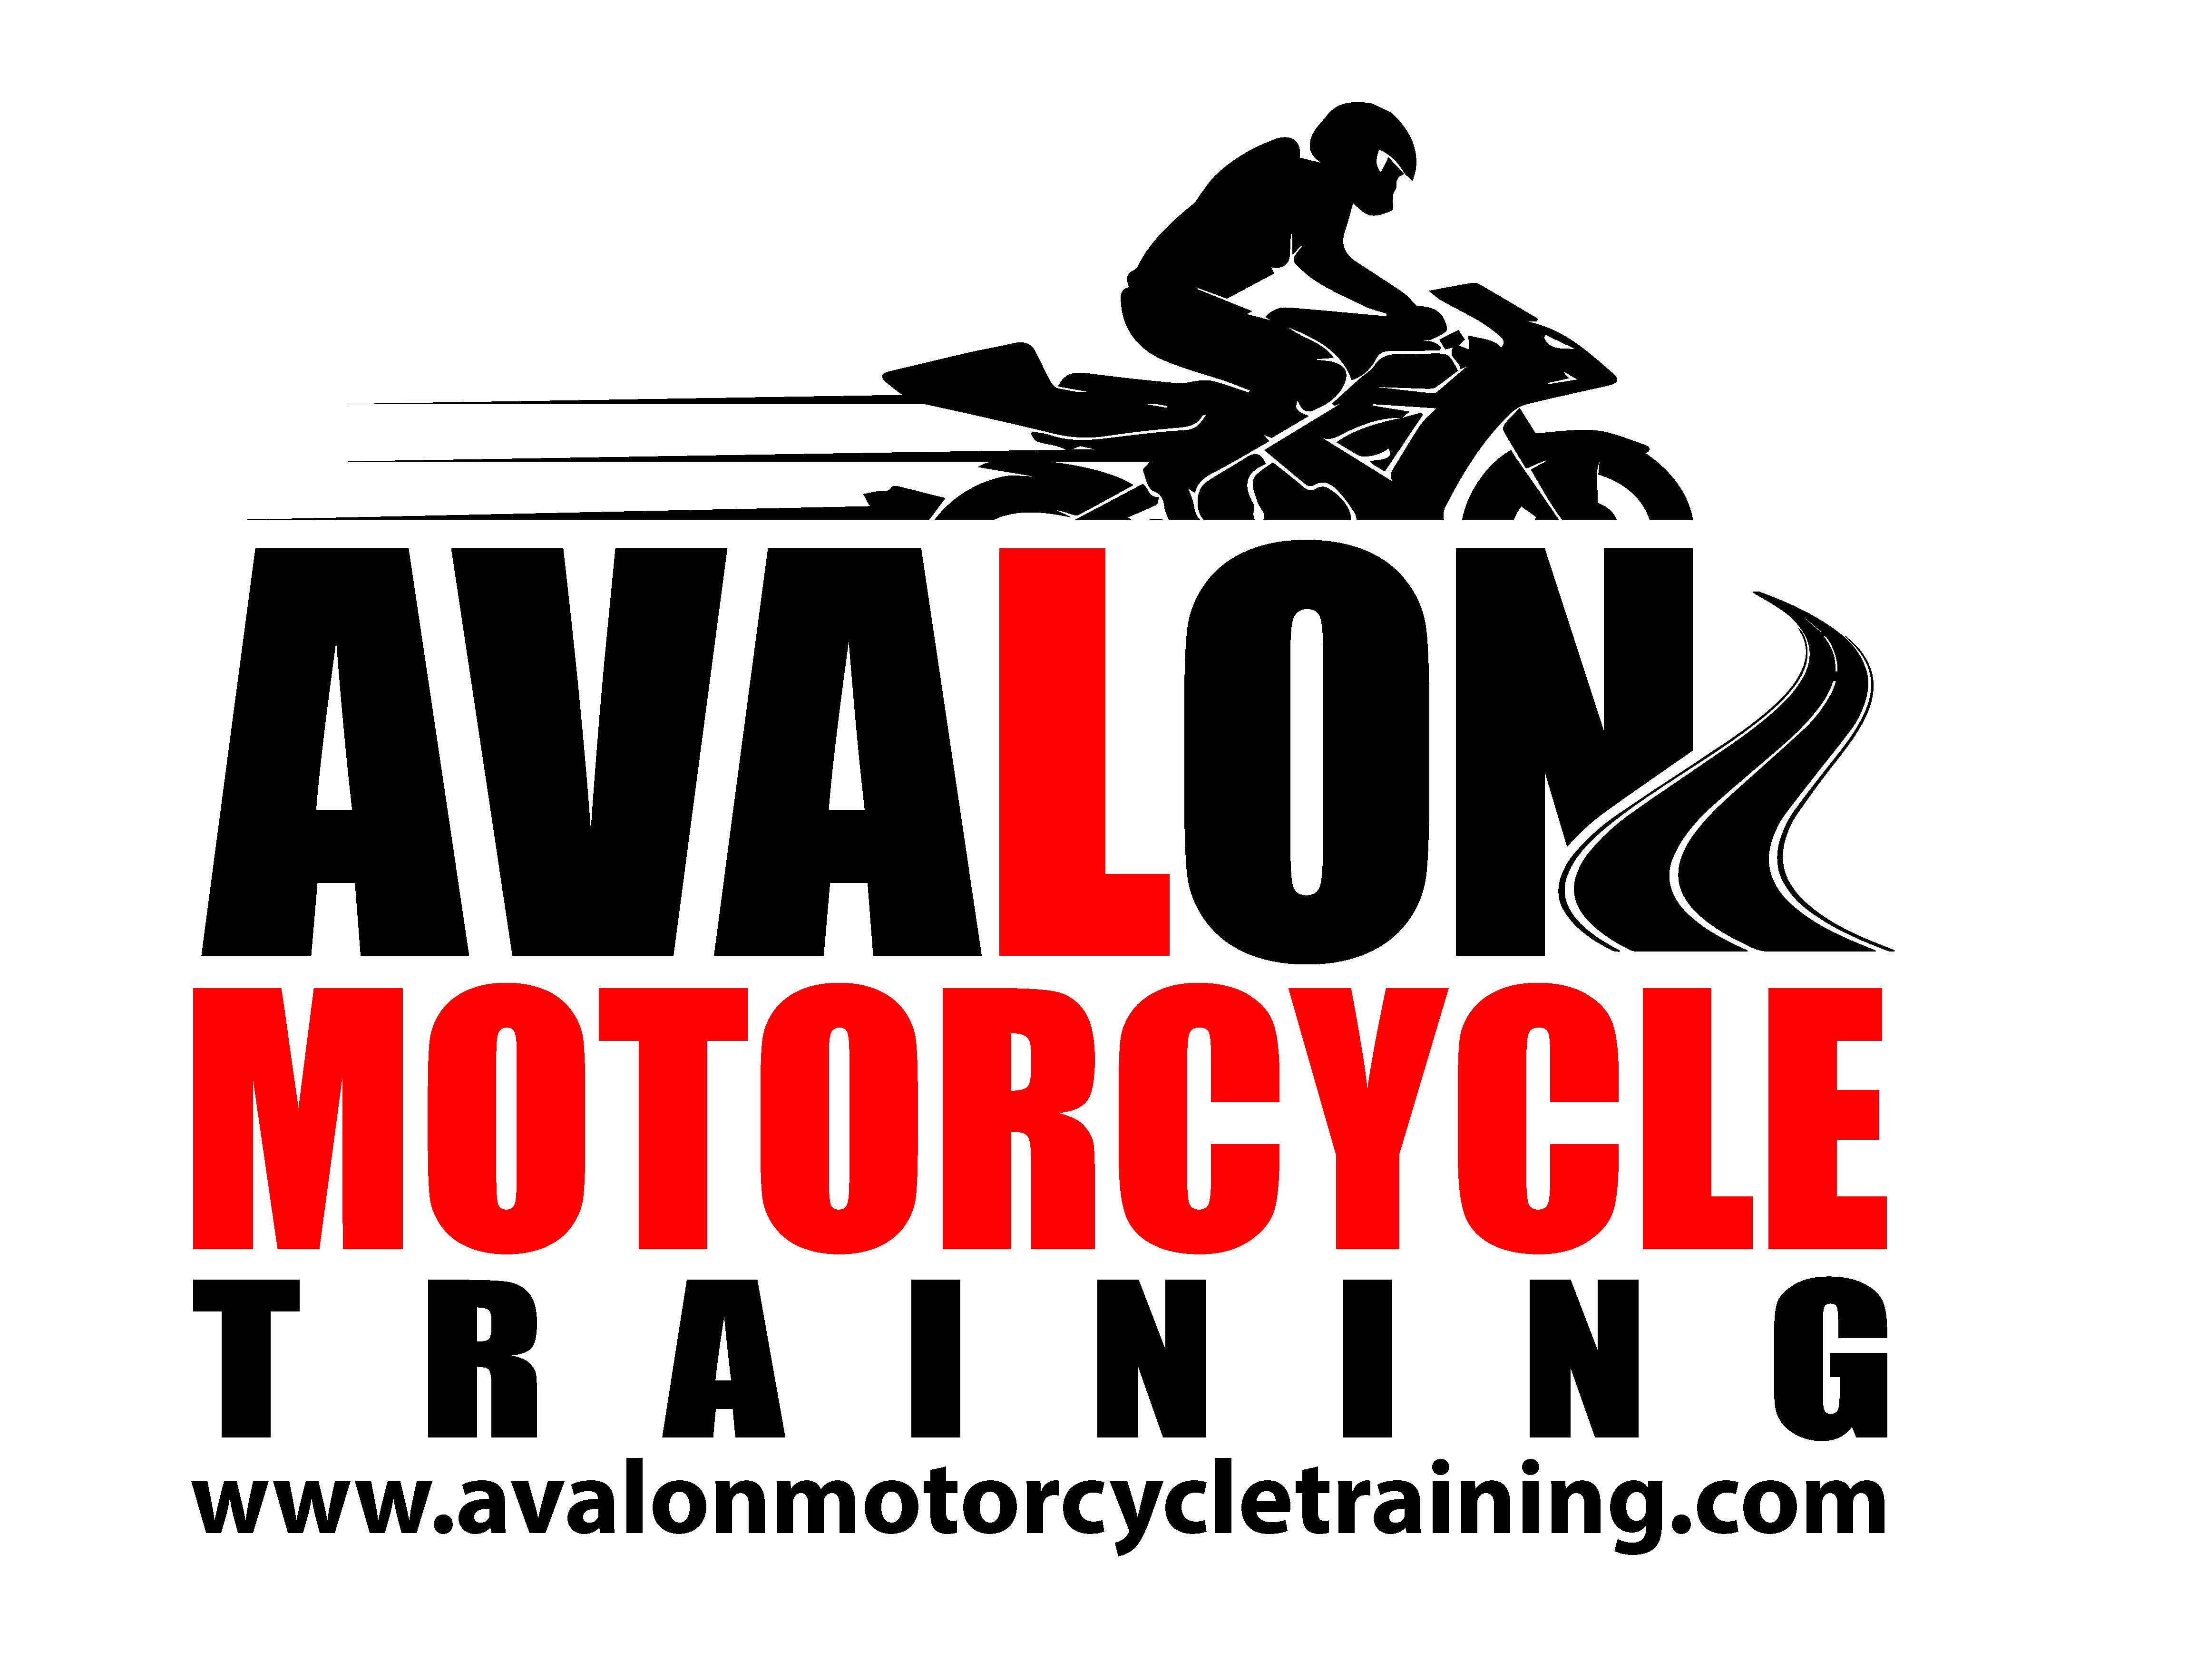 Avalon Motorcycle Training in Weston Super Mare